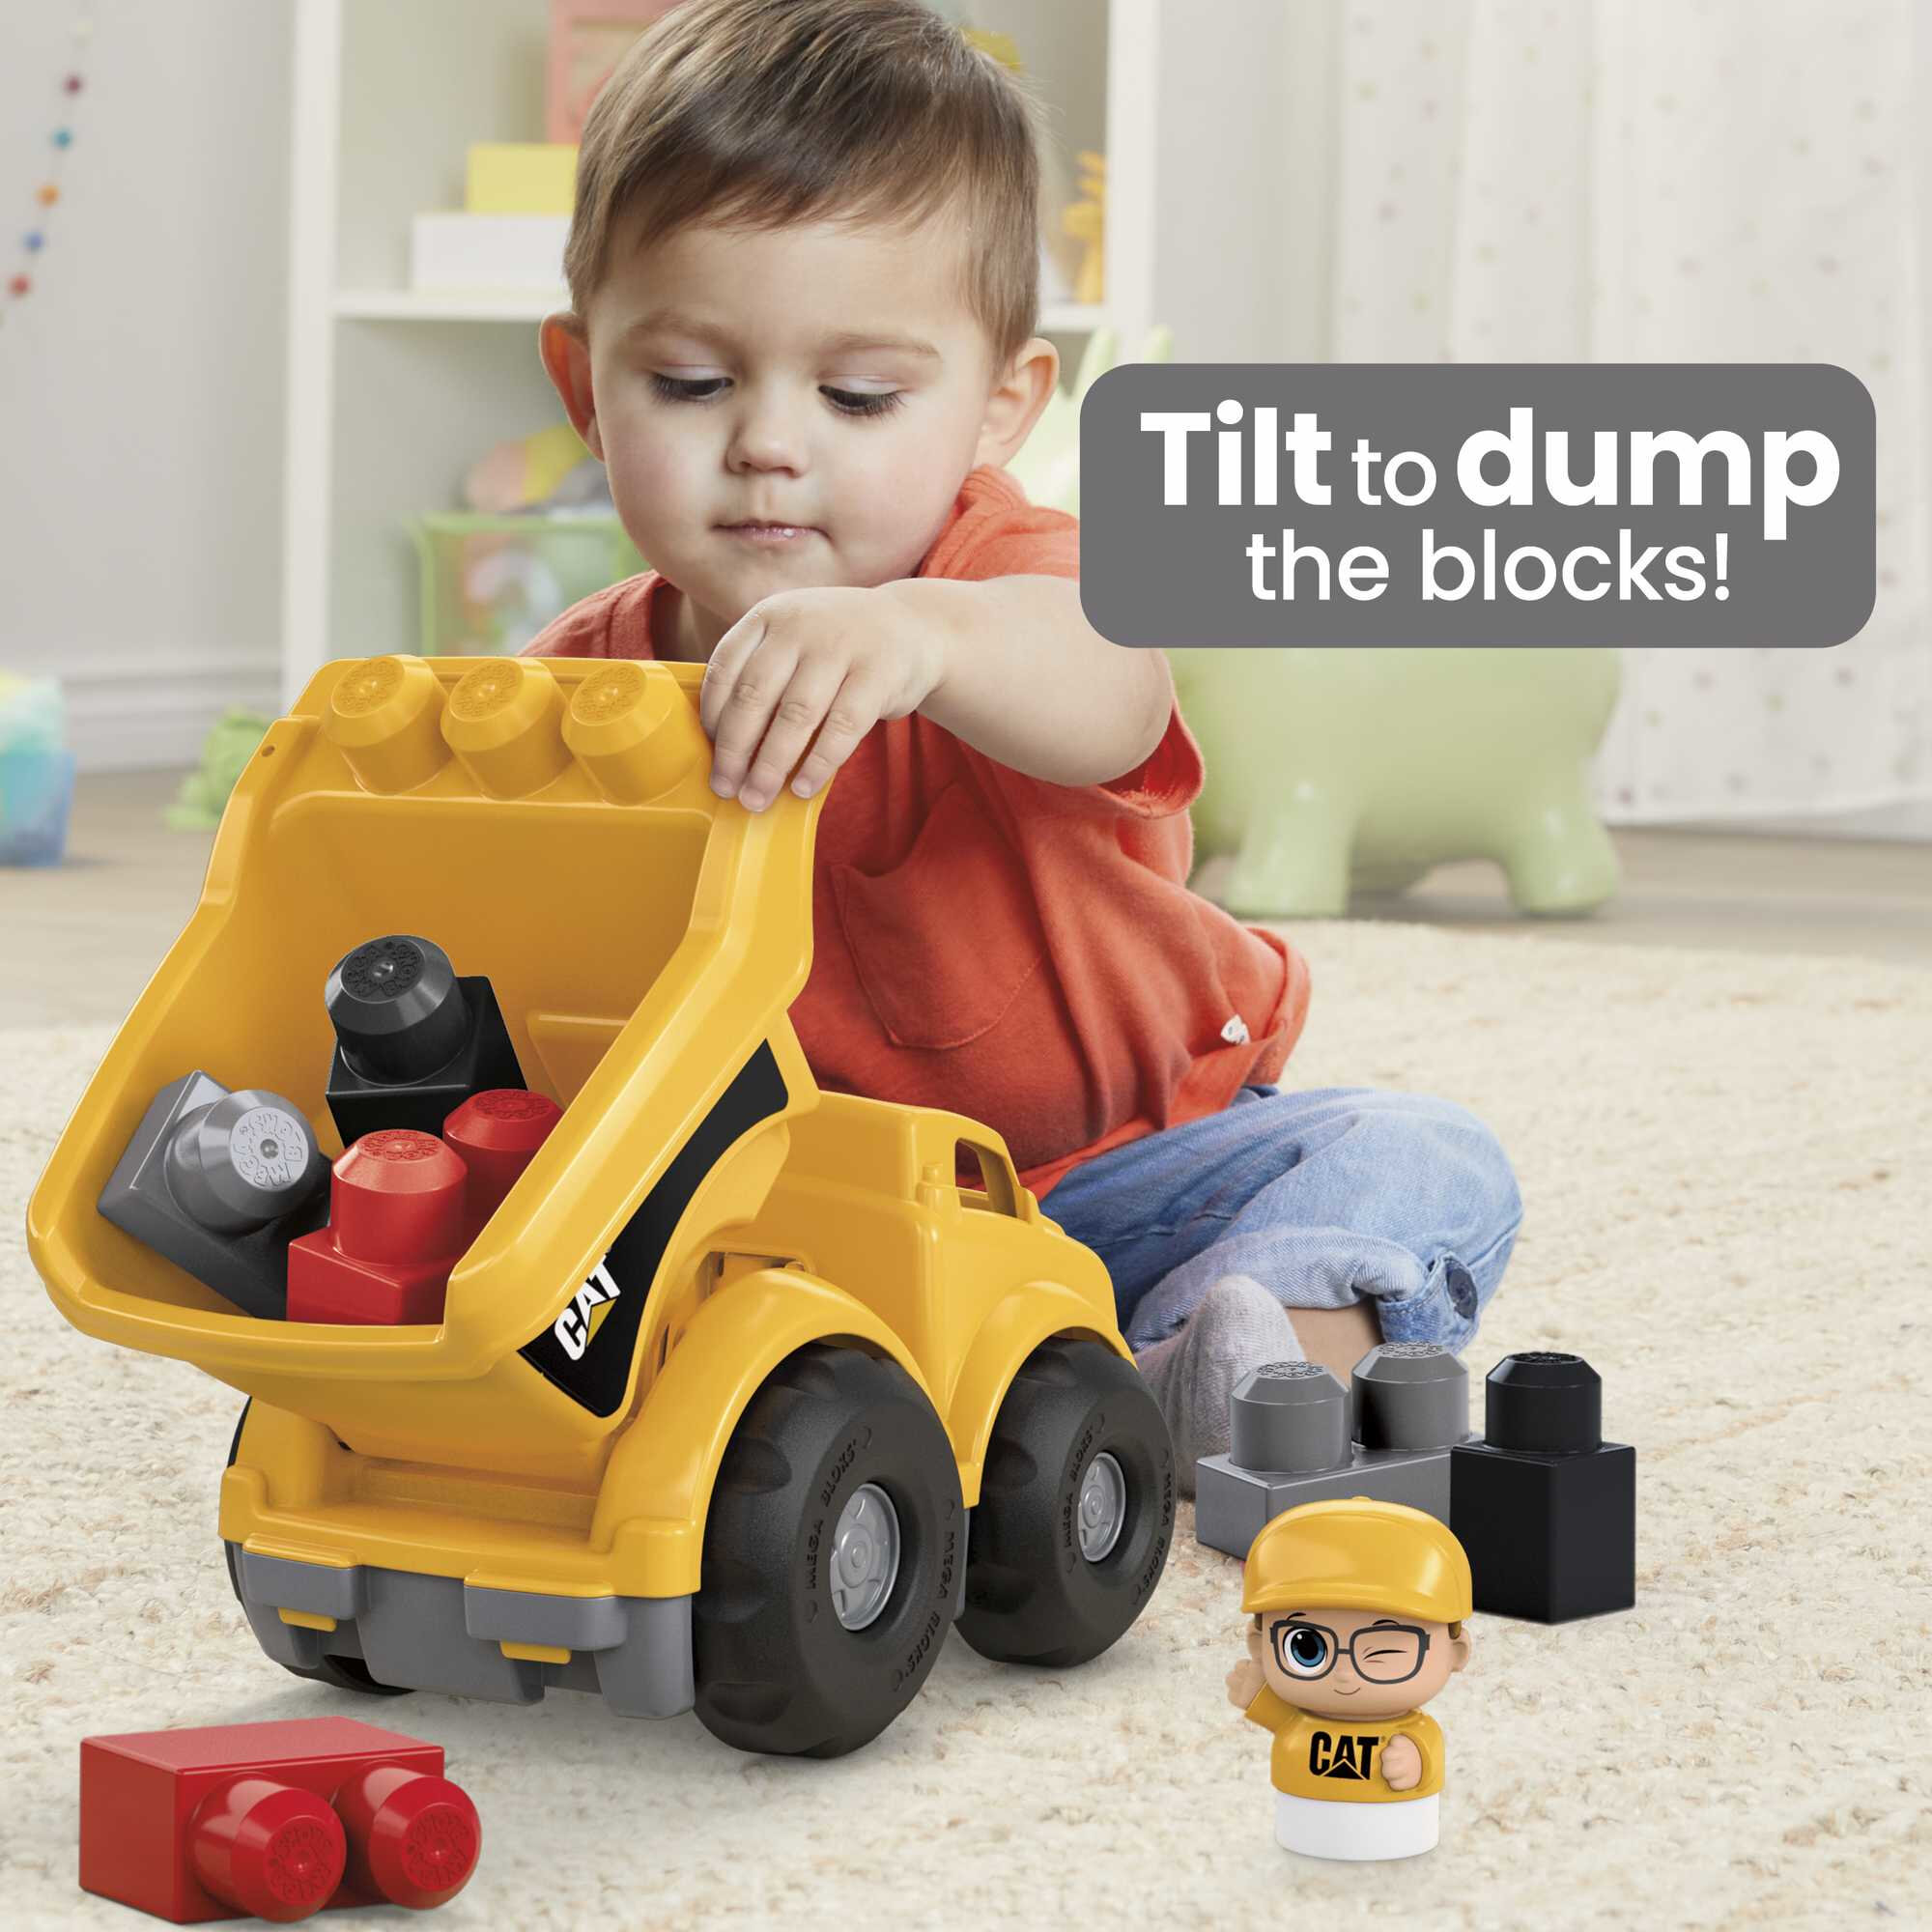 MEGA BLOKS Cat Building Toy Blocks Lil Dump Truck (7 Pieces) Fisher Price For Toddler - image 4 of 6